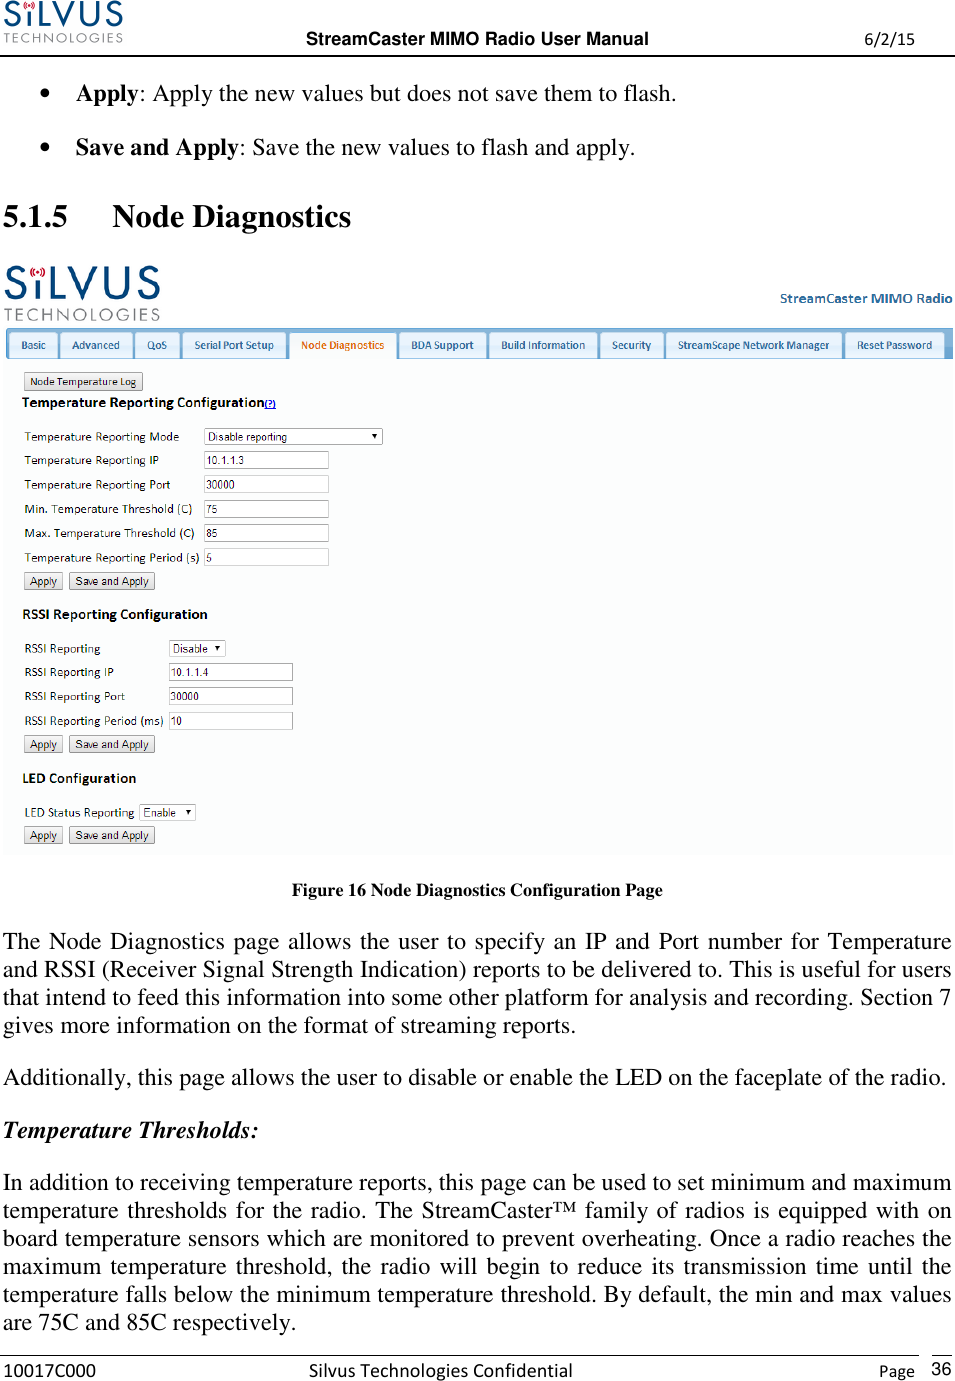  StreamCaster MIMO Radio User Manual  6/2/15 10017C000 Silvus Technologies Confidential    Page   36 • Apply: Apply the new values but does not save them to flash. • Save and Apply: Save the new values to flash and apply. 5.1.5 Node Diagnostics  Figure 16 Node Diagnostics Configuration Page The Node Diagnostics page allows the user to specify an IP and Port number for Temperature and RSSI (Receiver Signal Strength Indication) reports to be delivered to. This is useful for users that intend to feed this information into some other platform for analysis and recording. Section 7 gives more information on the format of streaming reports.  Additionally, this page allows the user to disable or enable the LED on the faceplate of the radio. Temperature Thresholds: In addition to receiving temperature reports, this page can be used to set minimum and maximum temperature thresholds for the radio. The StreamCaster™ family of radios is equipped with on board temperature sensors which are monitored to prevent overheating. Once a radio reaches the maximum temperature threshold, the radio will begin to reduce its transmission time until the temperature falls below the minimum temperature threshold. By default, the min and max values are 75C and 85C respectively. 